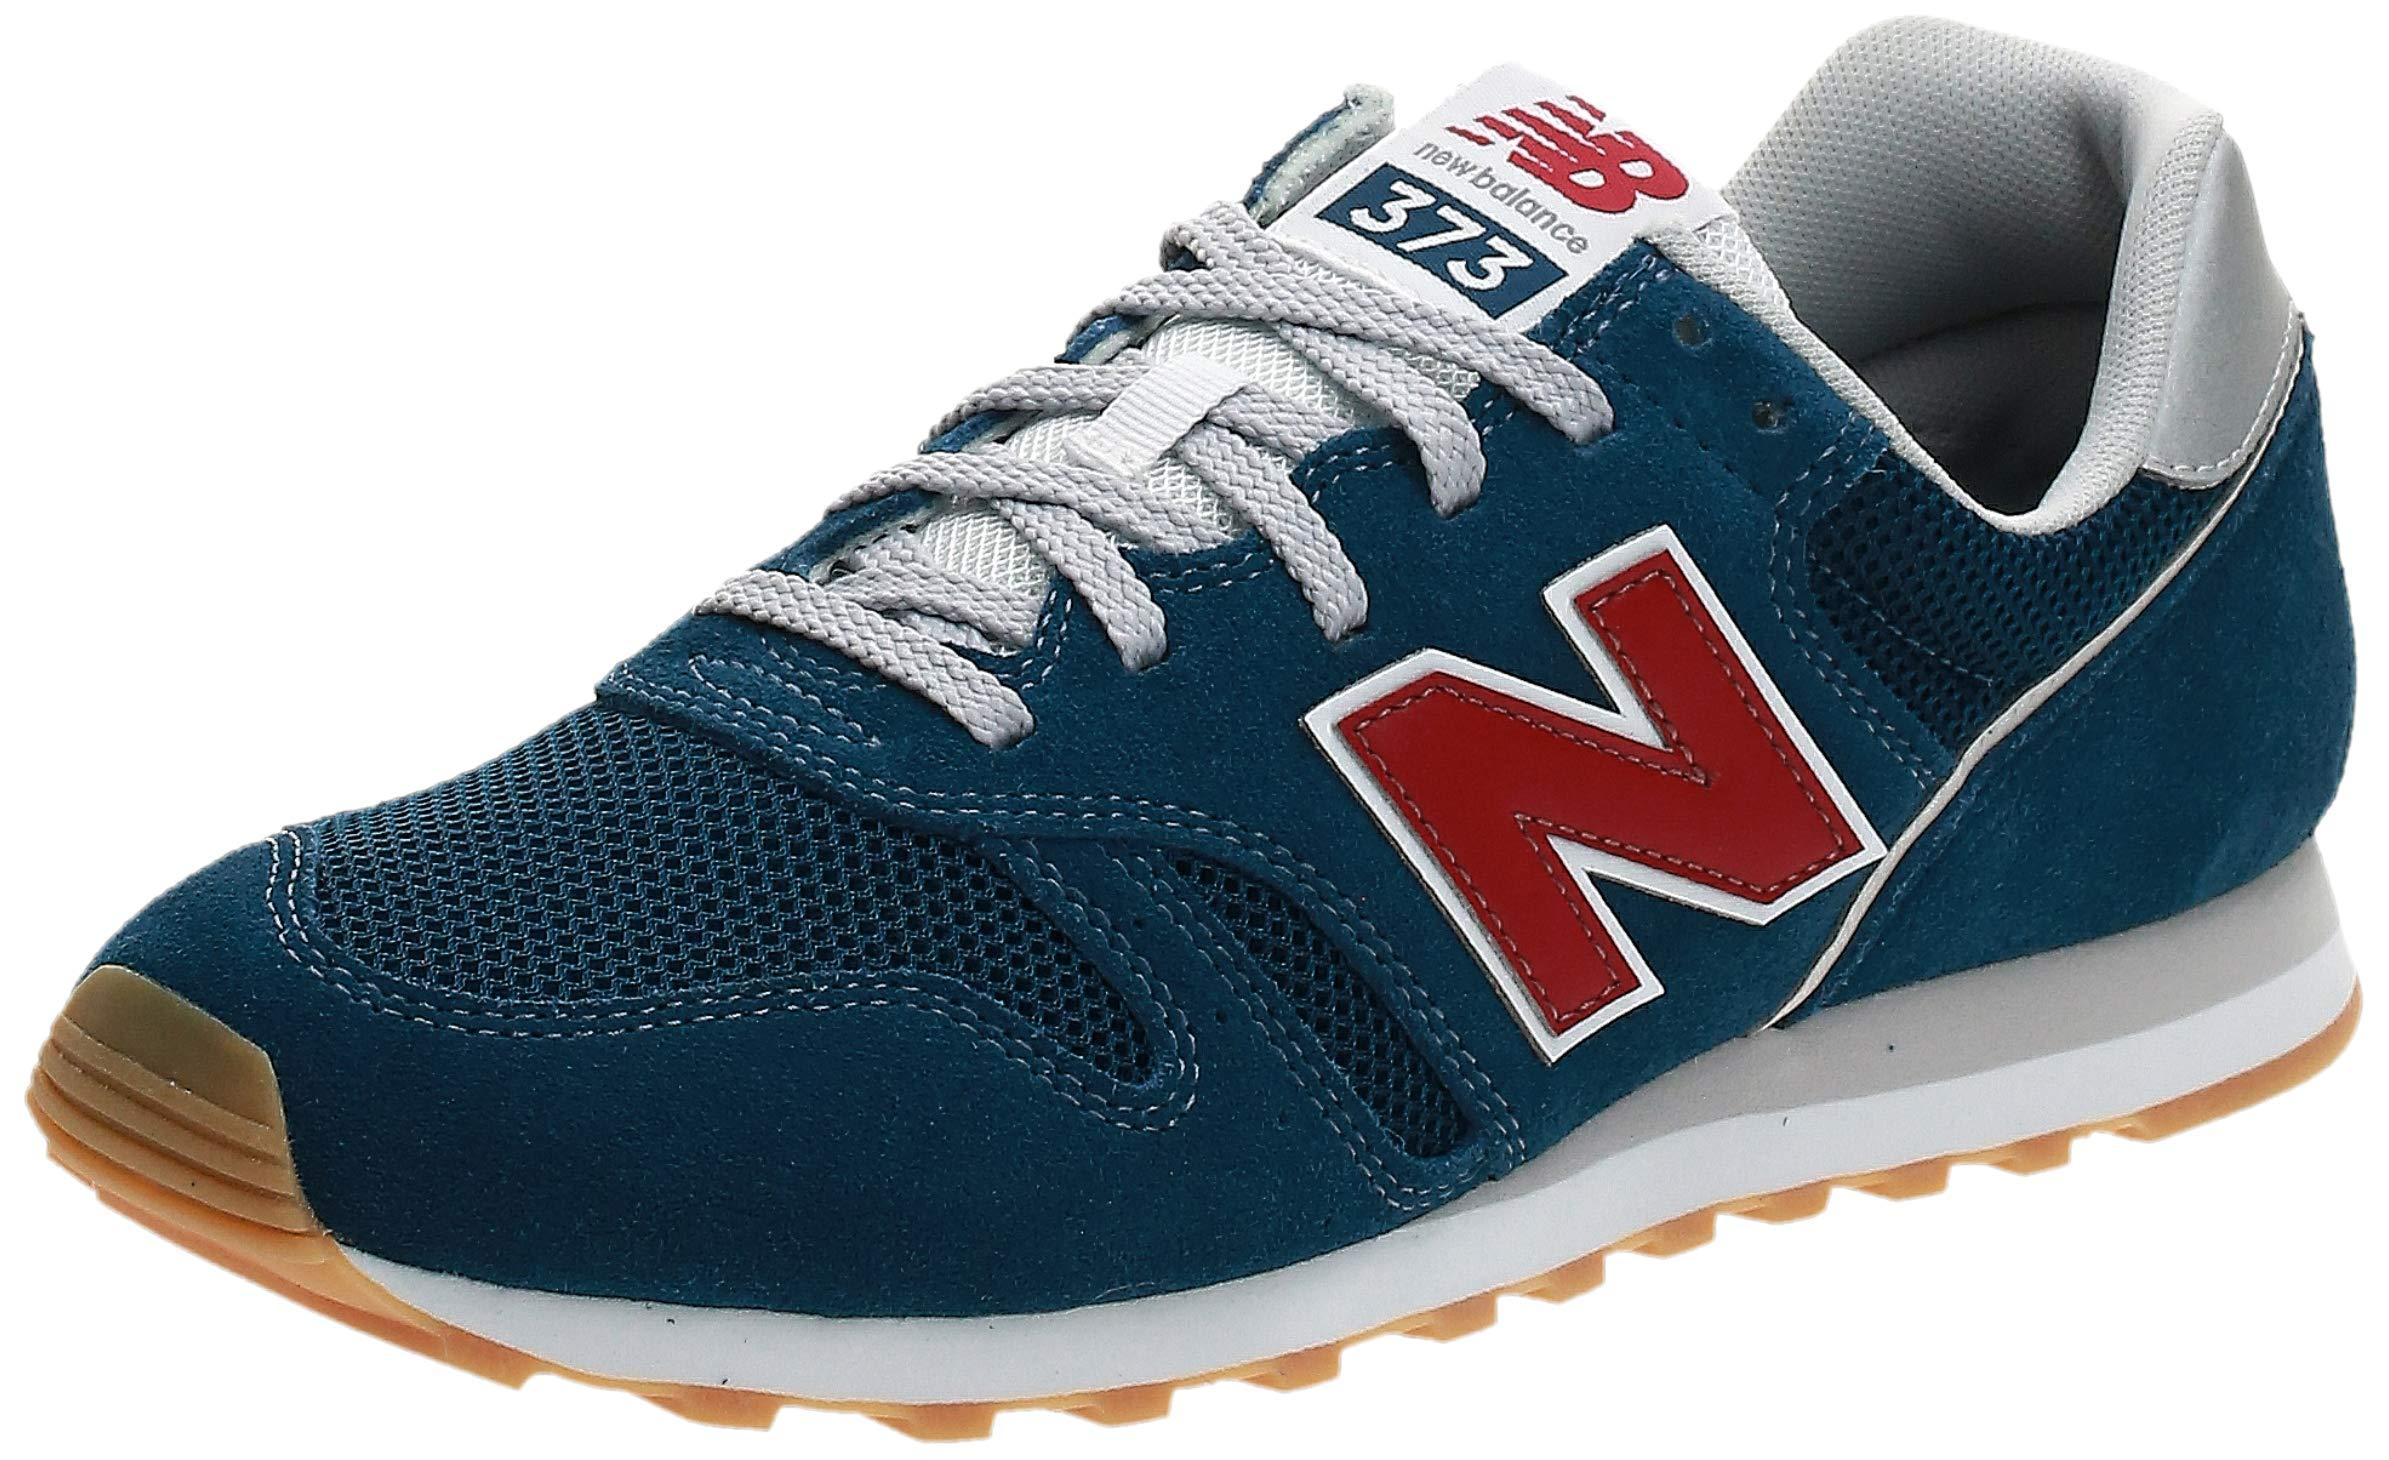 New Balance Suede 373 Trainers in Navy (Blue) for Men - Save 71% - Lyst